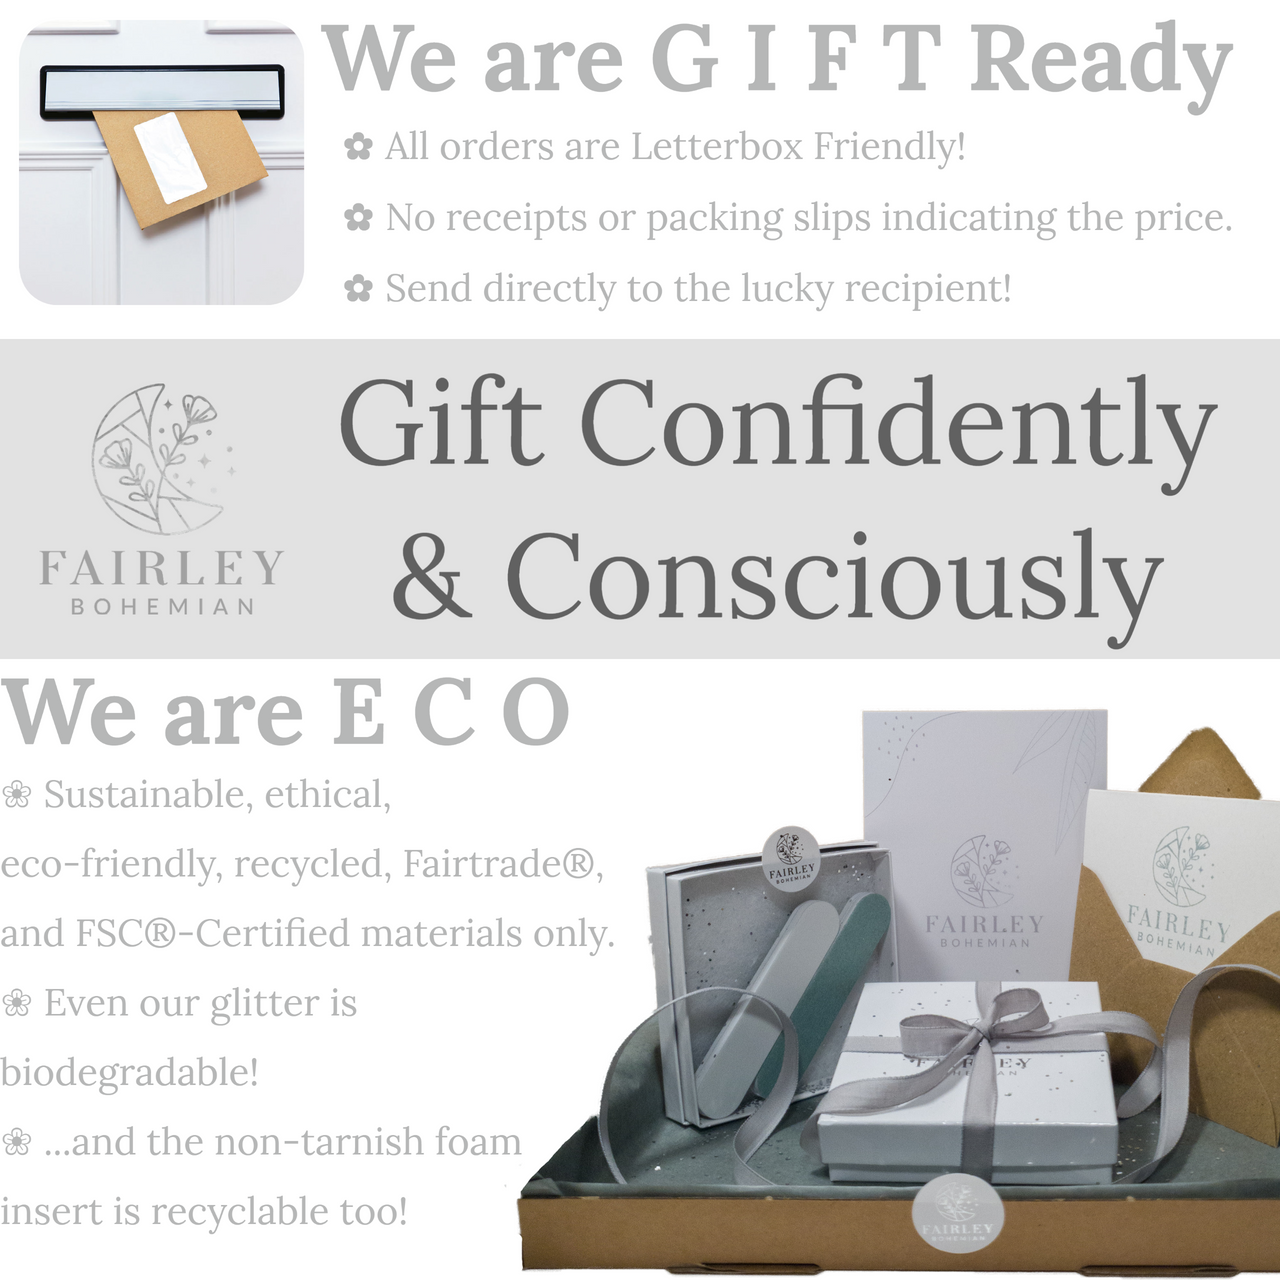 gift confidently and consciously with fairley bohemian